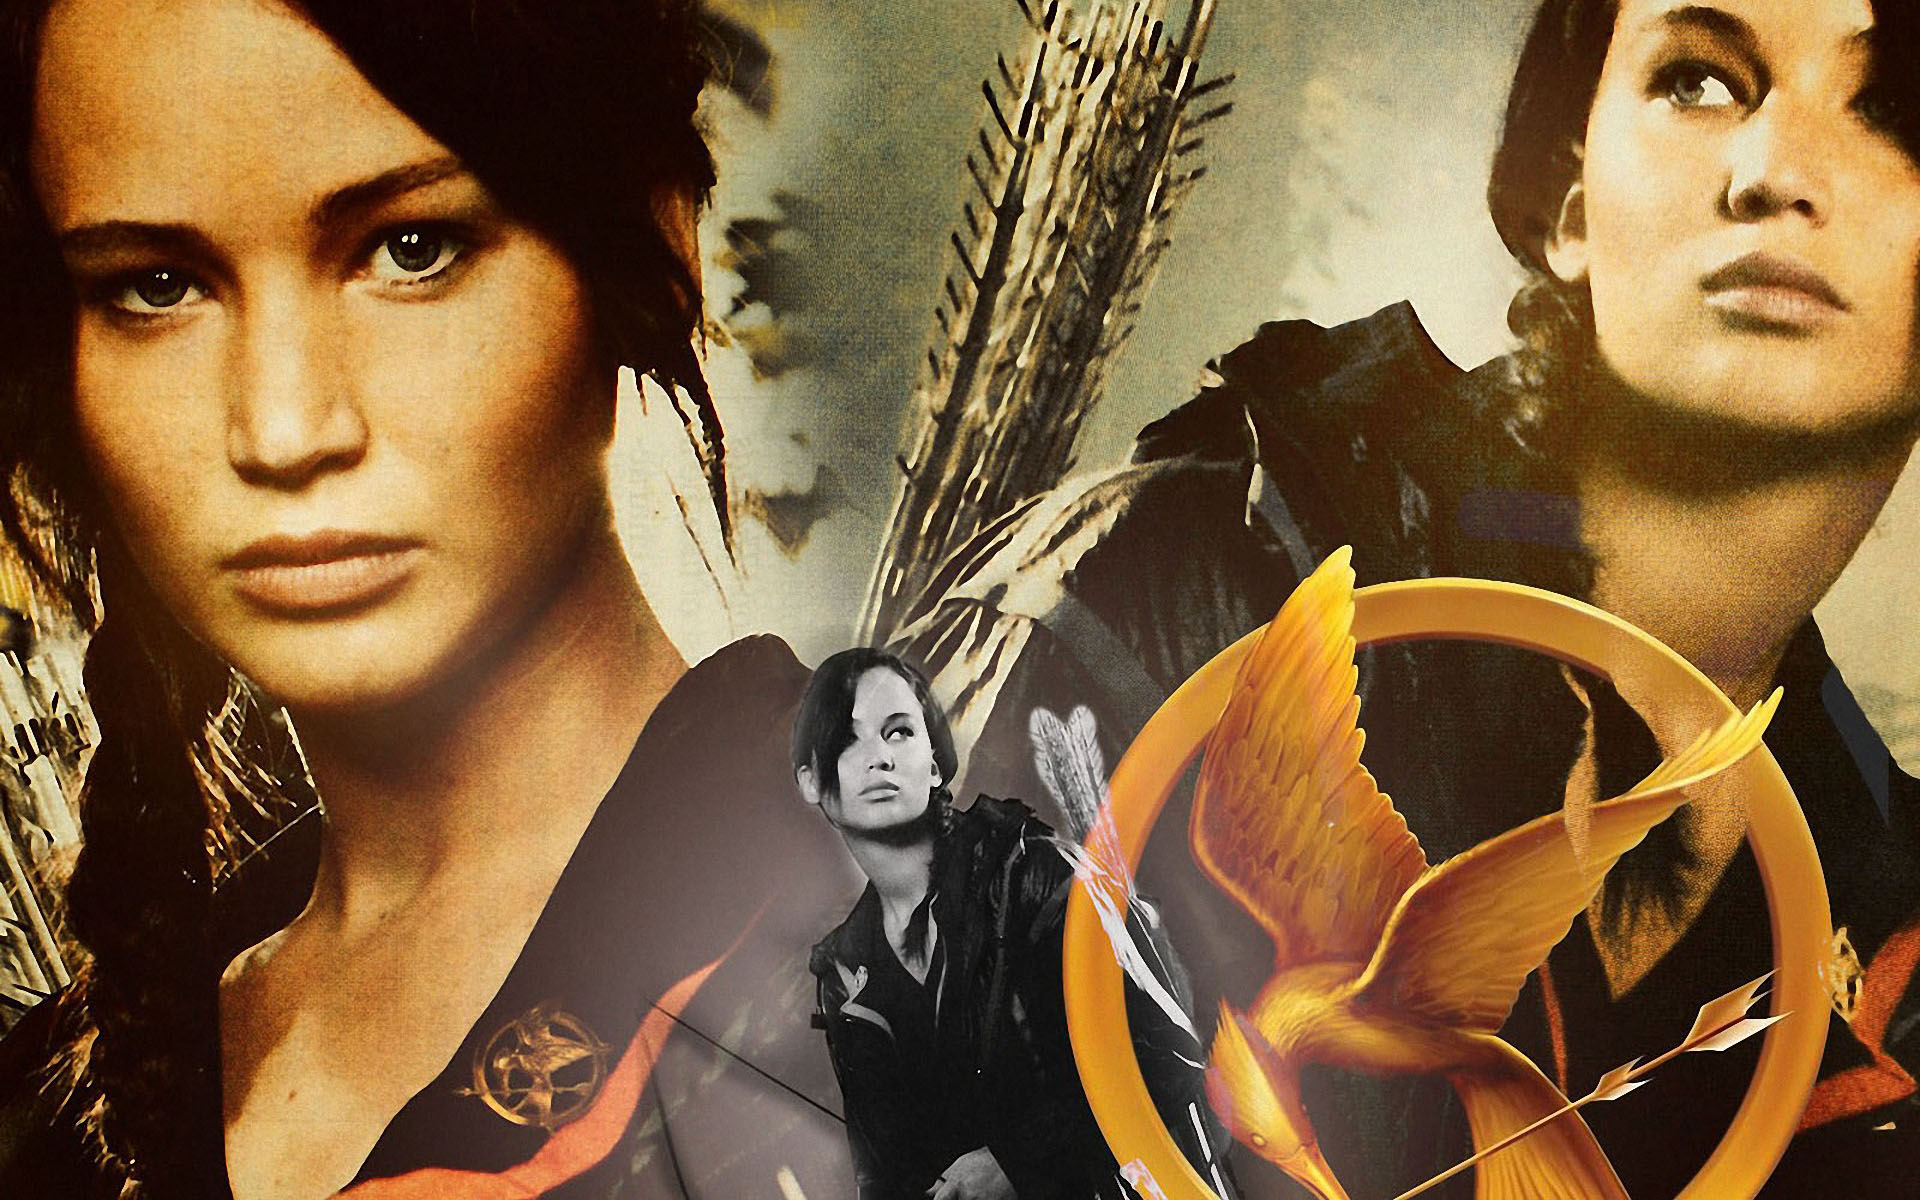 The Hunger Games Wallpaper 1920x1200 Wallpapers 1920x1200 Wallpapers 1920x1200